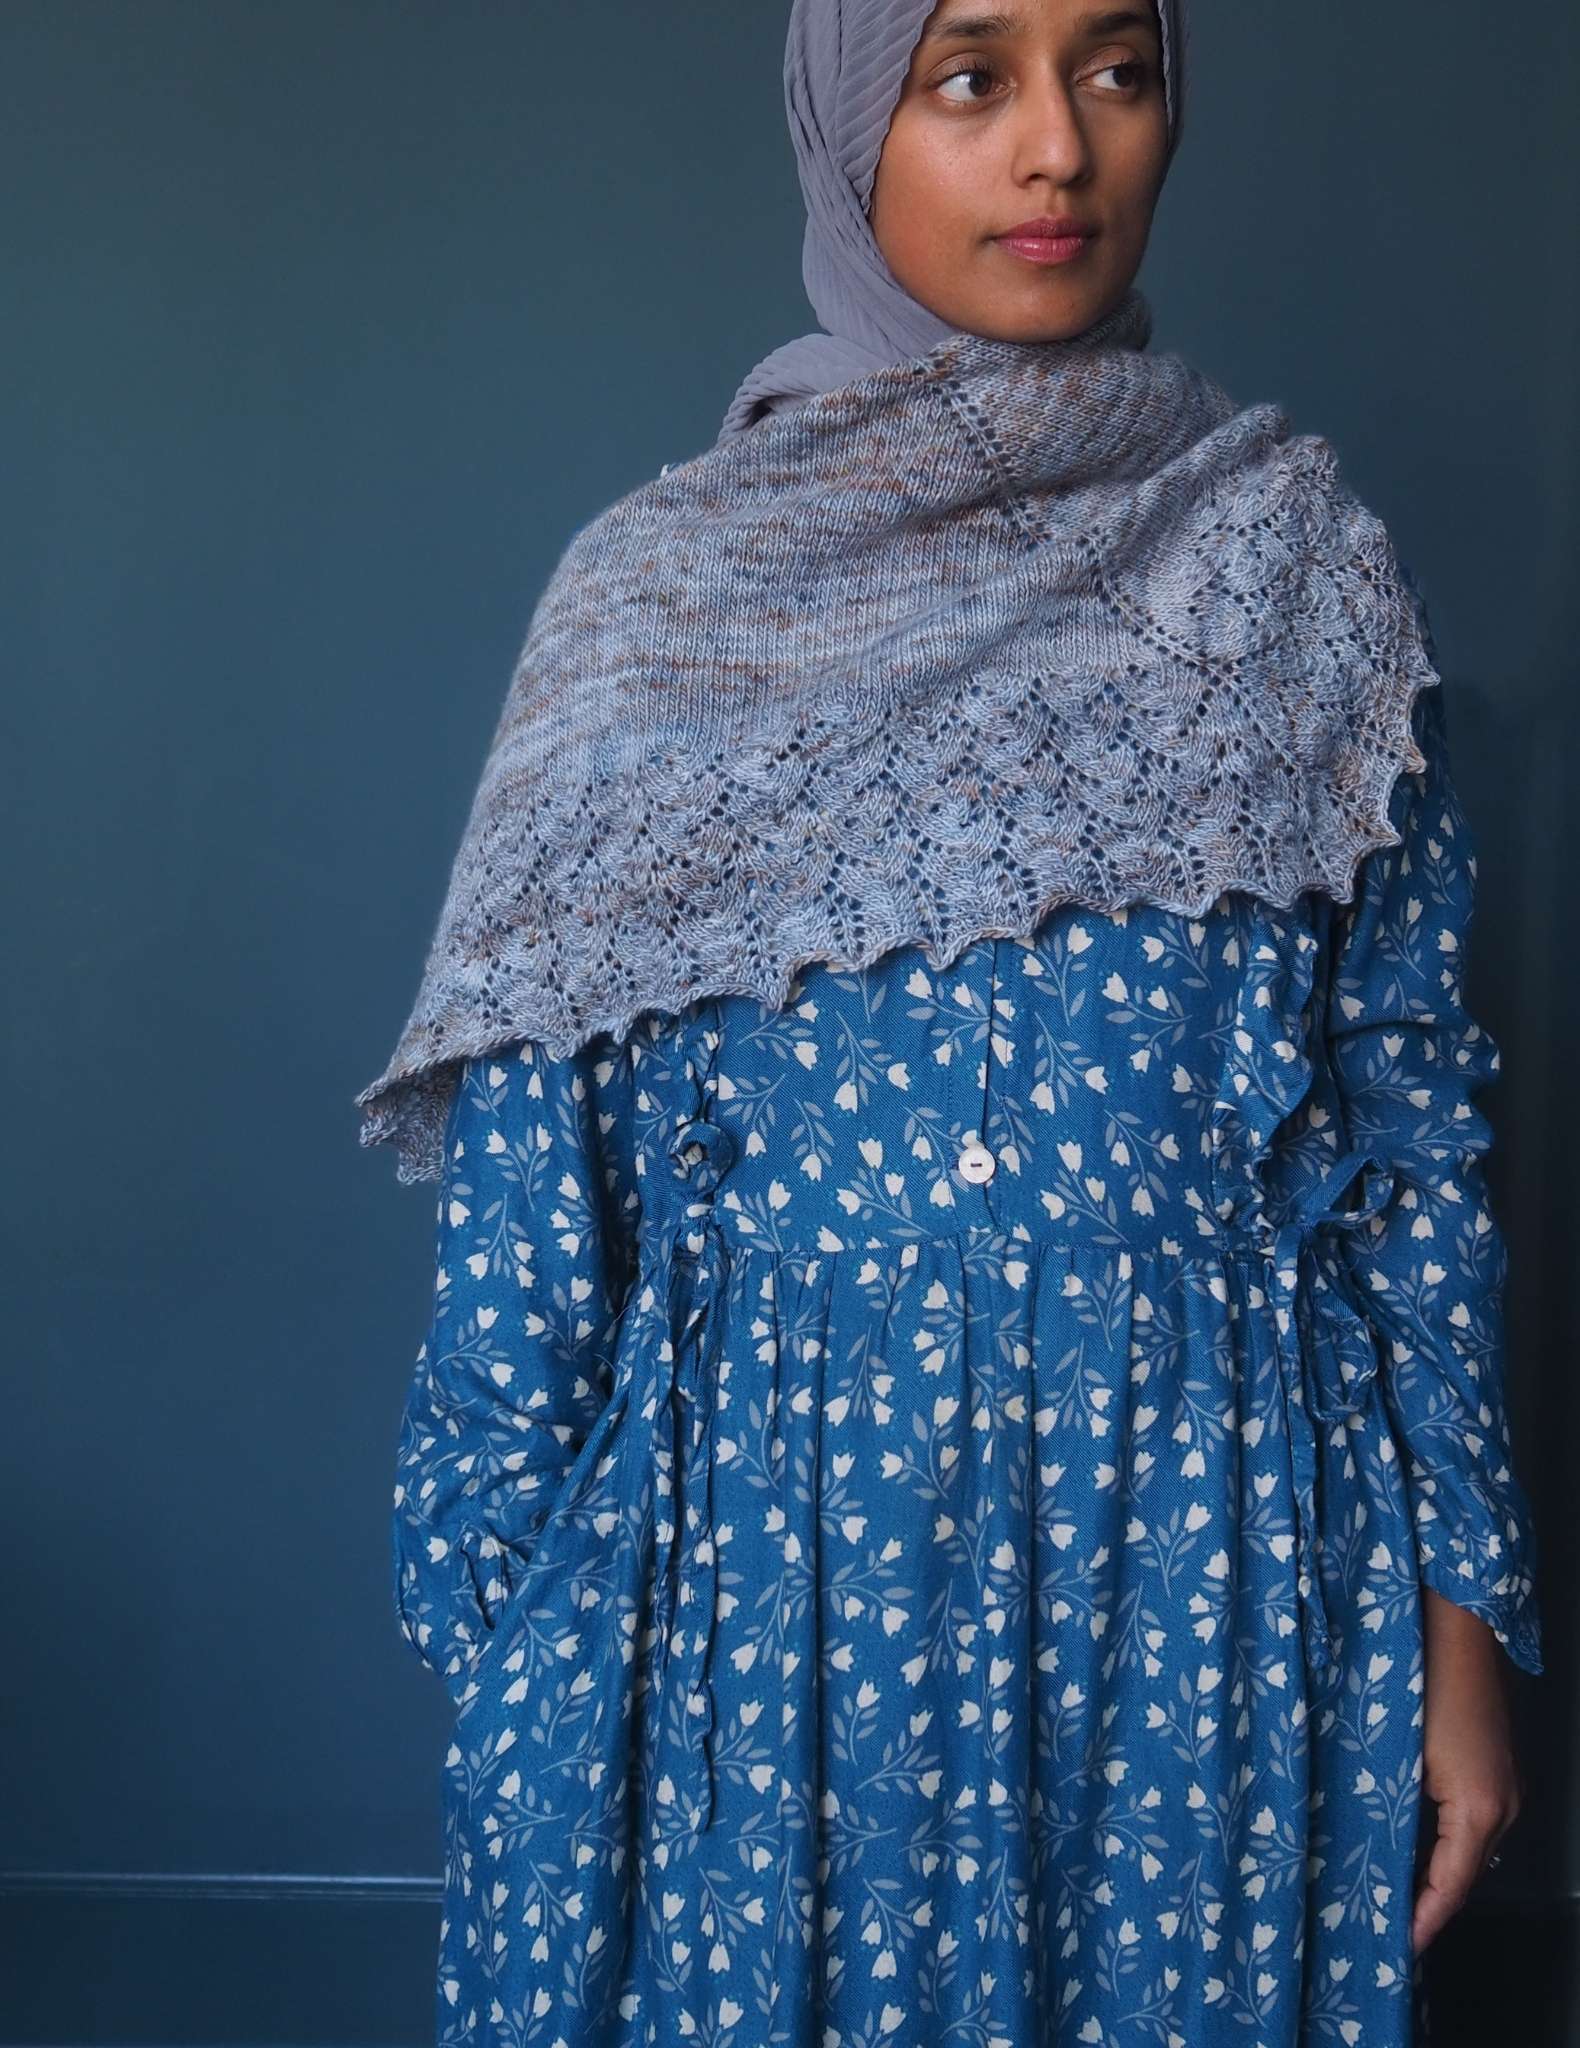 A brown woman in a hijab stands in front of a dark blue background and looks to the side. She is wearing a blue dress with small white floral print, and has a grey blue shawl wrapped around her shoulders and chest.